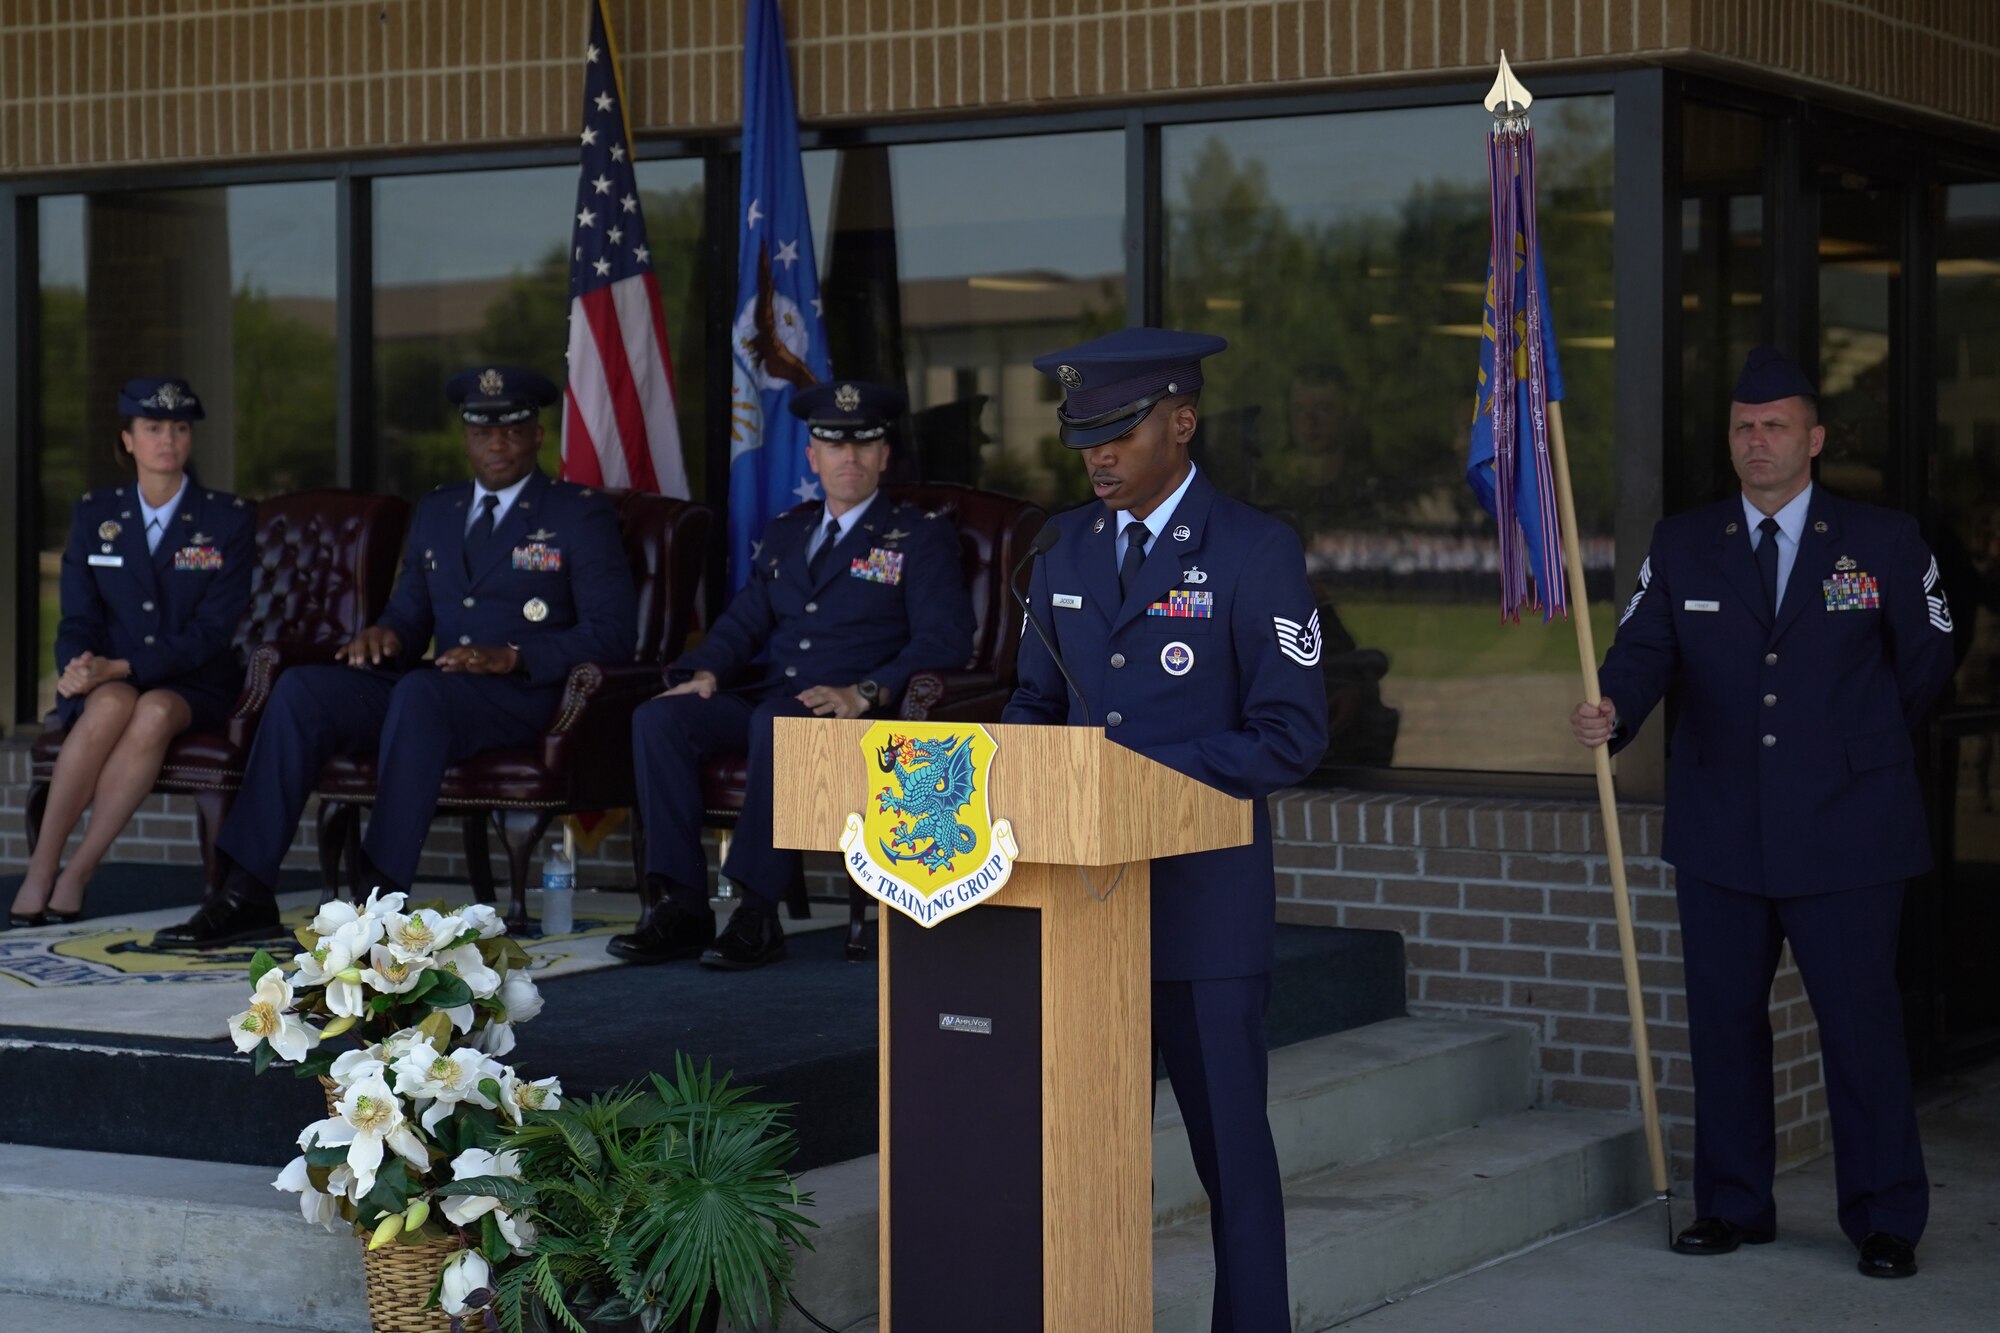 U.S Air Force Tech. Sgt. Marcus Jackson, 334th Training Squadron instructor, speaks during the 81st Training Group change of command ceremony at the Levitow Training Support Facility drill pad on Keesler Air Force Base, Mississippi, July 1, 2019. The ceremony is a symbol of command being exchanged from one commander to the next by the handing-off of a ceremonial guidon. (U.S. Air Force photo by Airman 1st Class Kimberly L. Mueller)